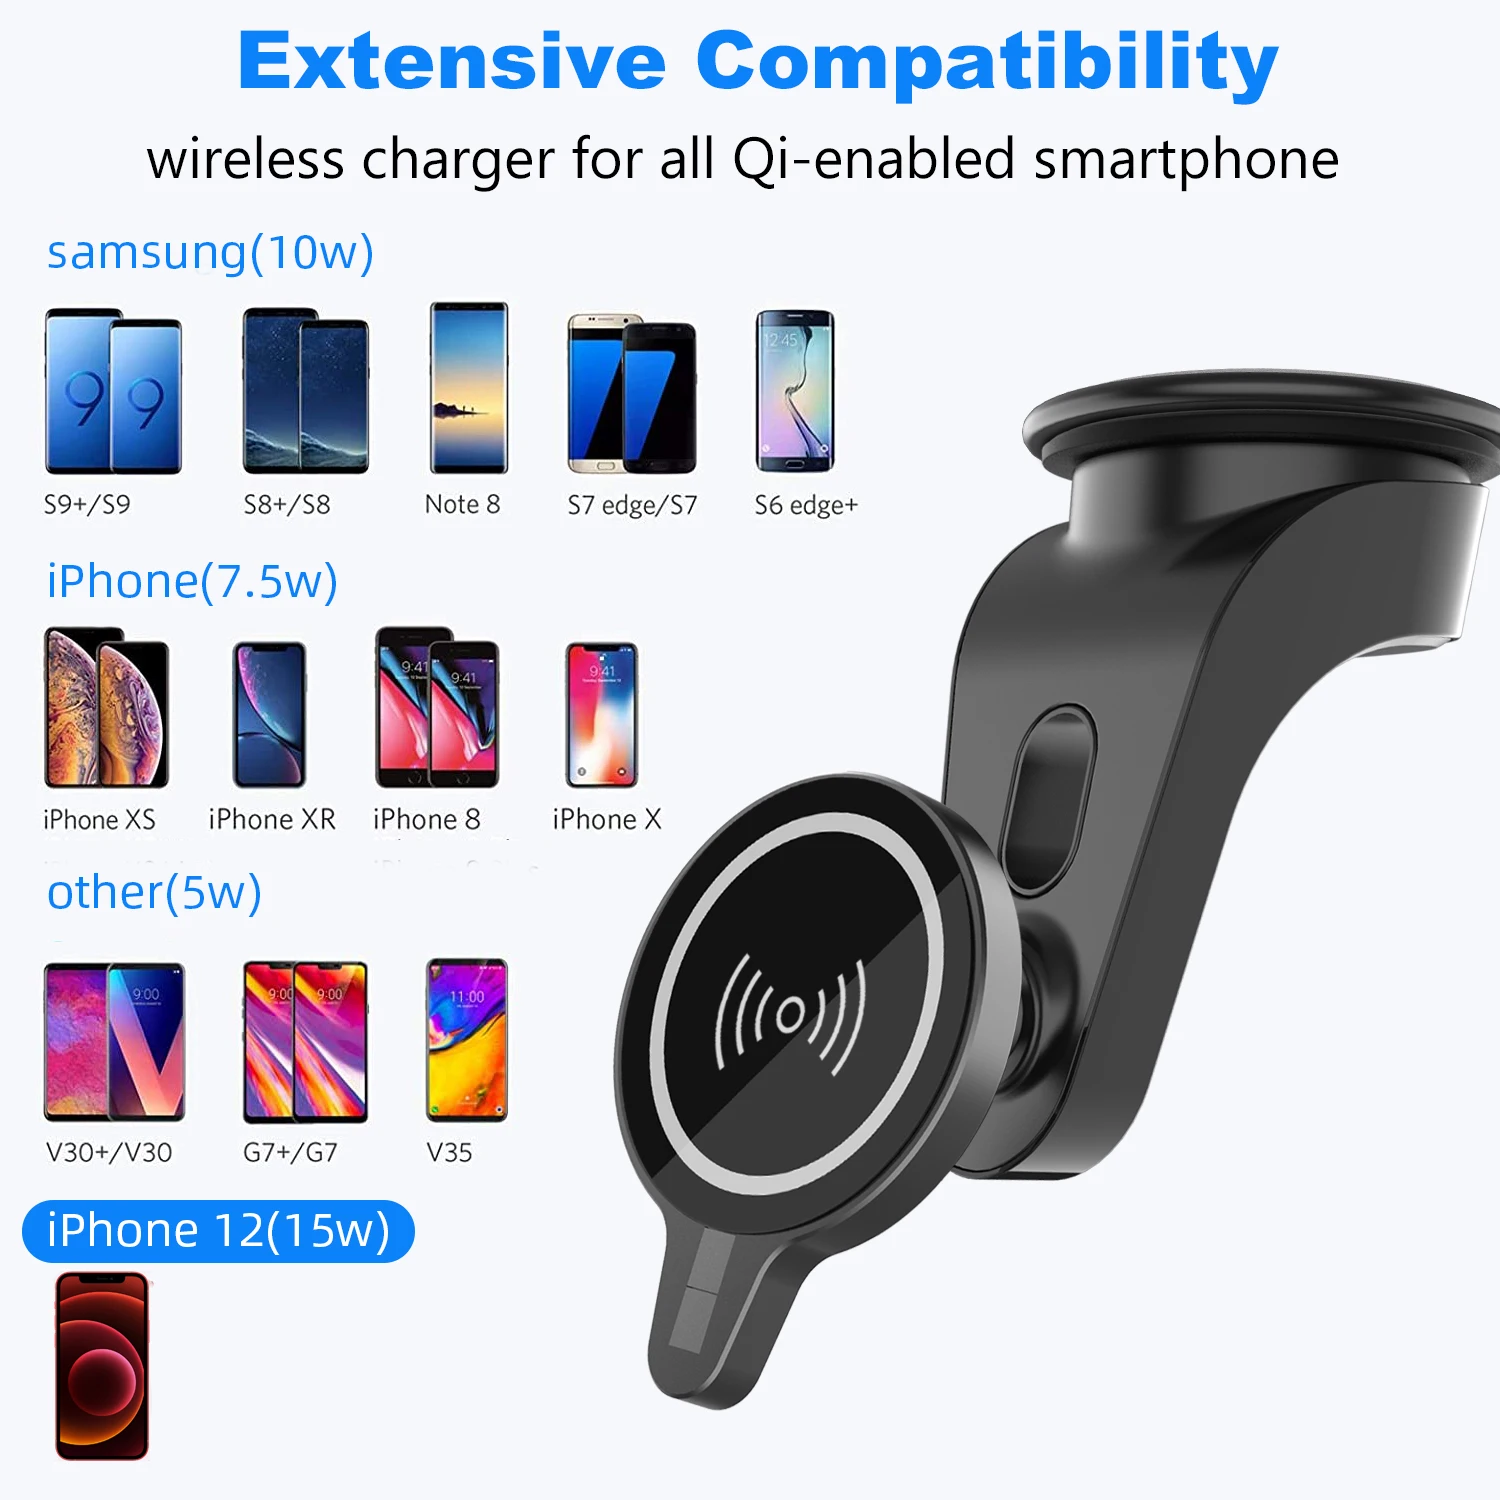 15w magnetic car wireless charging for iphone 12 pro max 12 mini 11 pro paste magnetic phone charger for iphone 12 11 10 x xr xs free global shipping